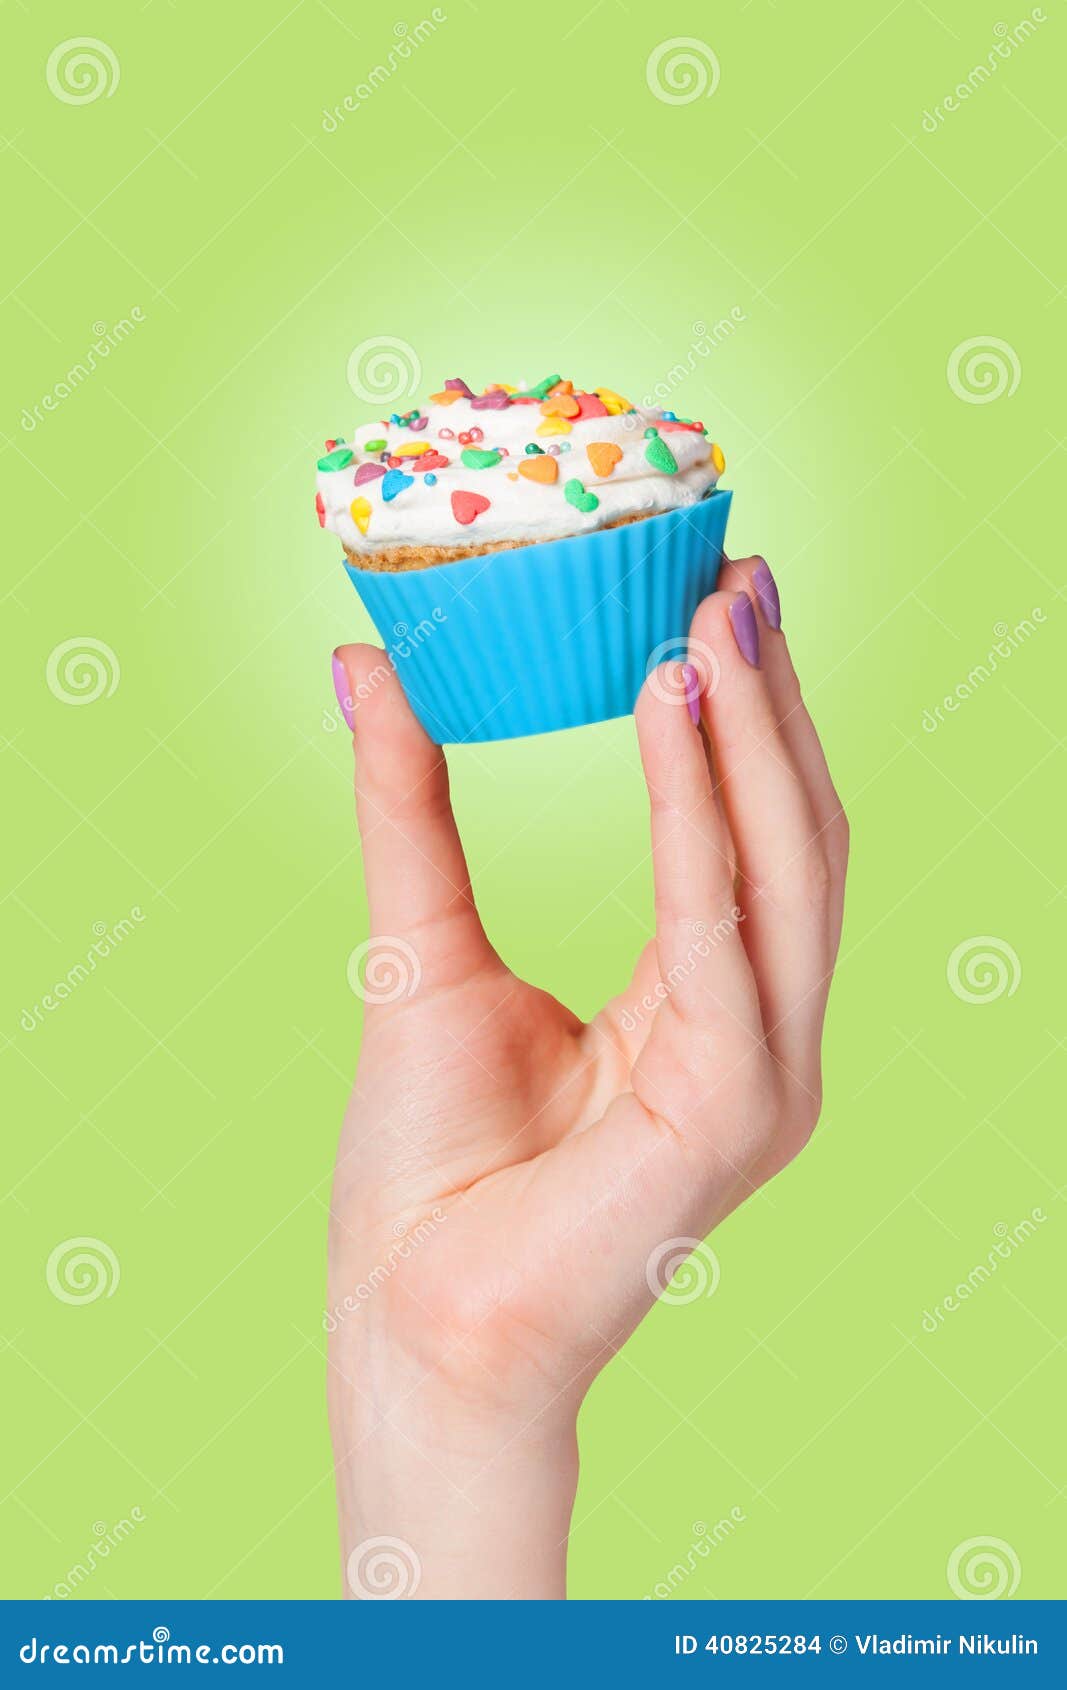 hand-holding-cupcake-green-background-40